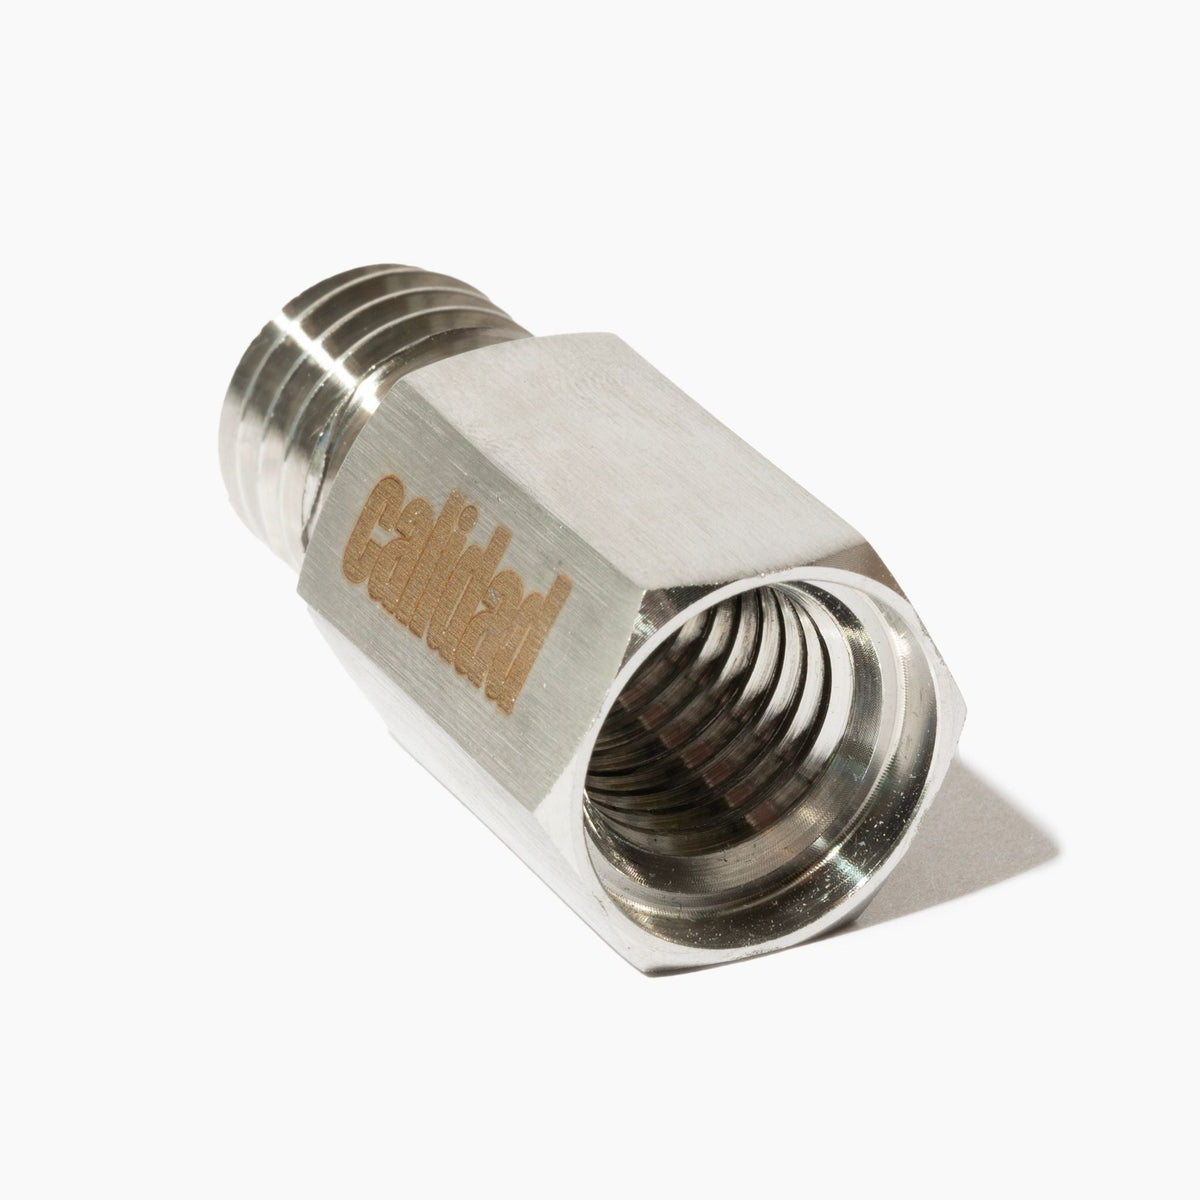 The adapter converts your M14 arbor to 5/8&quot;-11 threaded hub for 5/8&quot;-11 male threaded connector